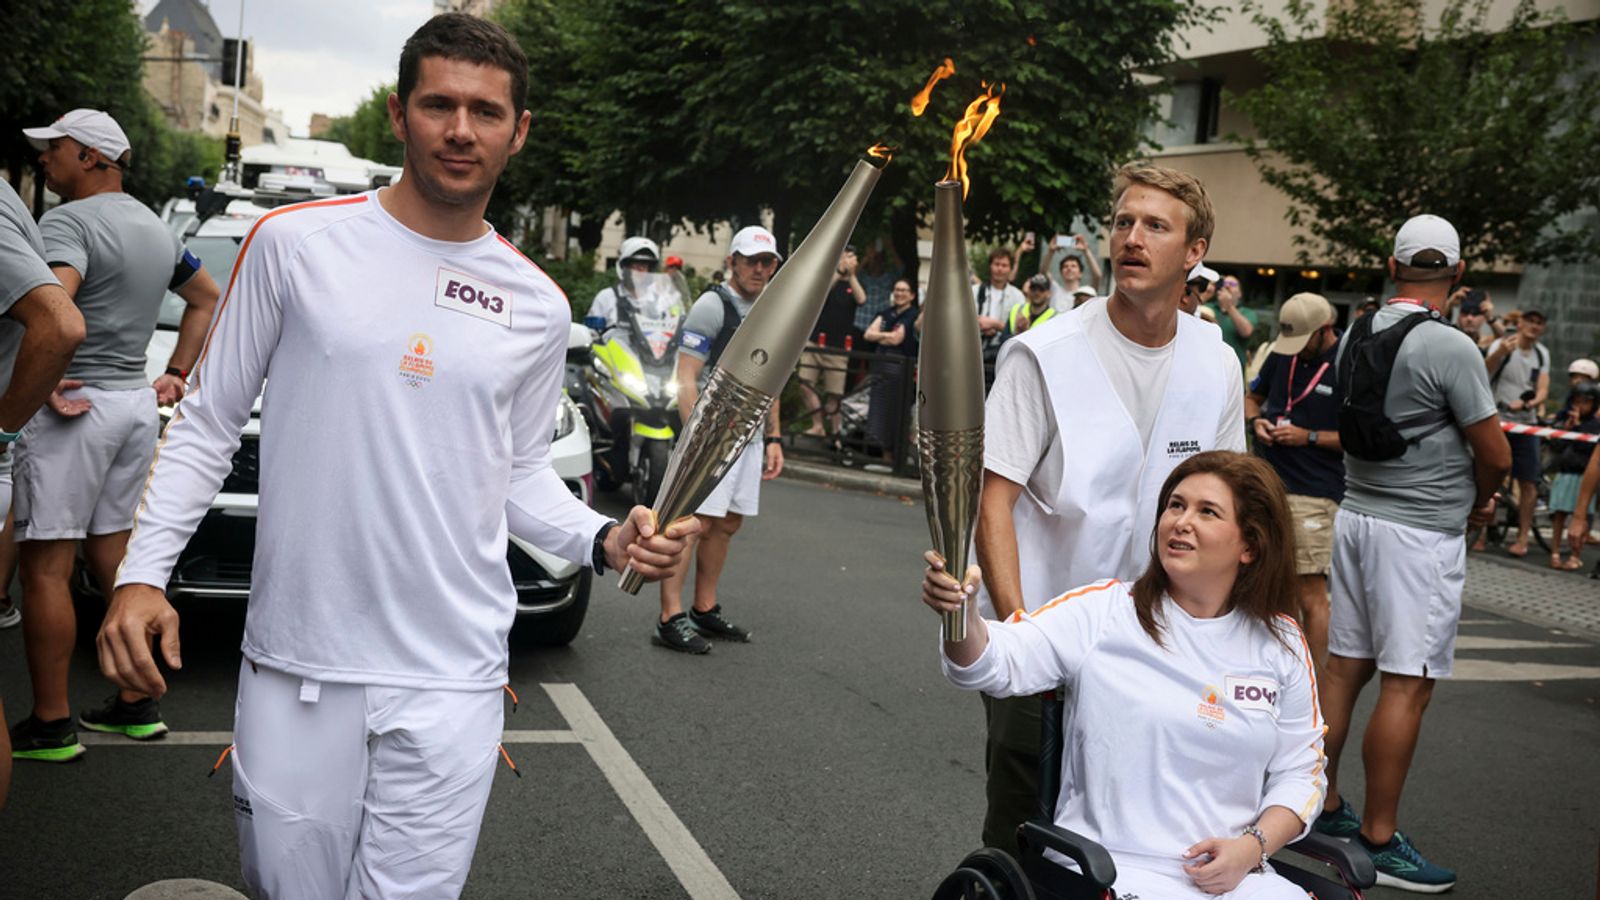 Journalist injured in Israeli attack in Lebanon carries Olympic torch to France | World news